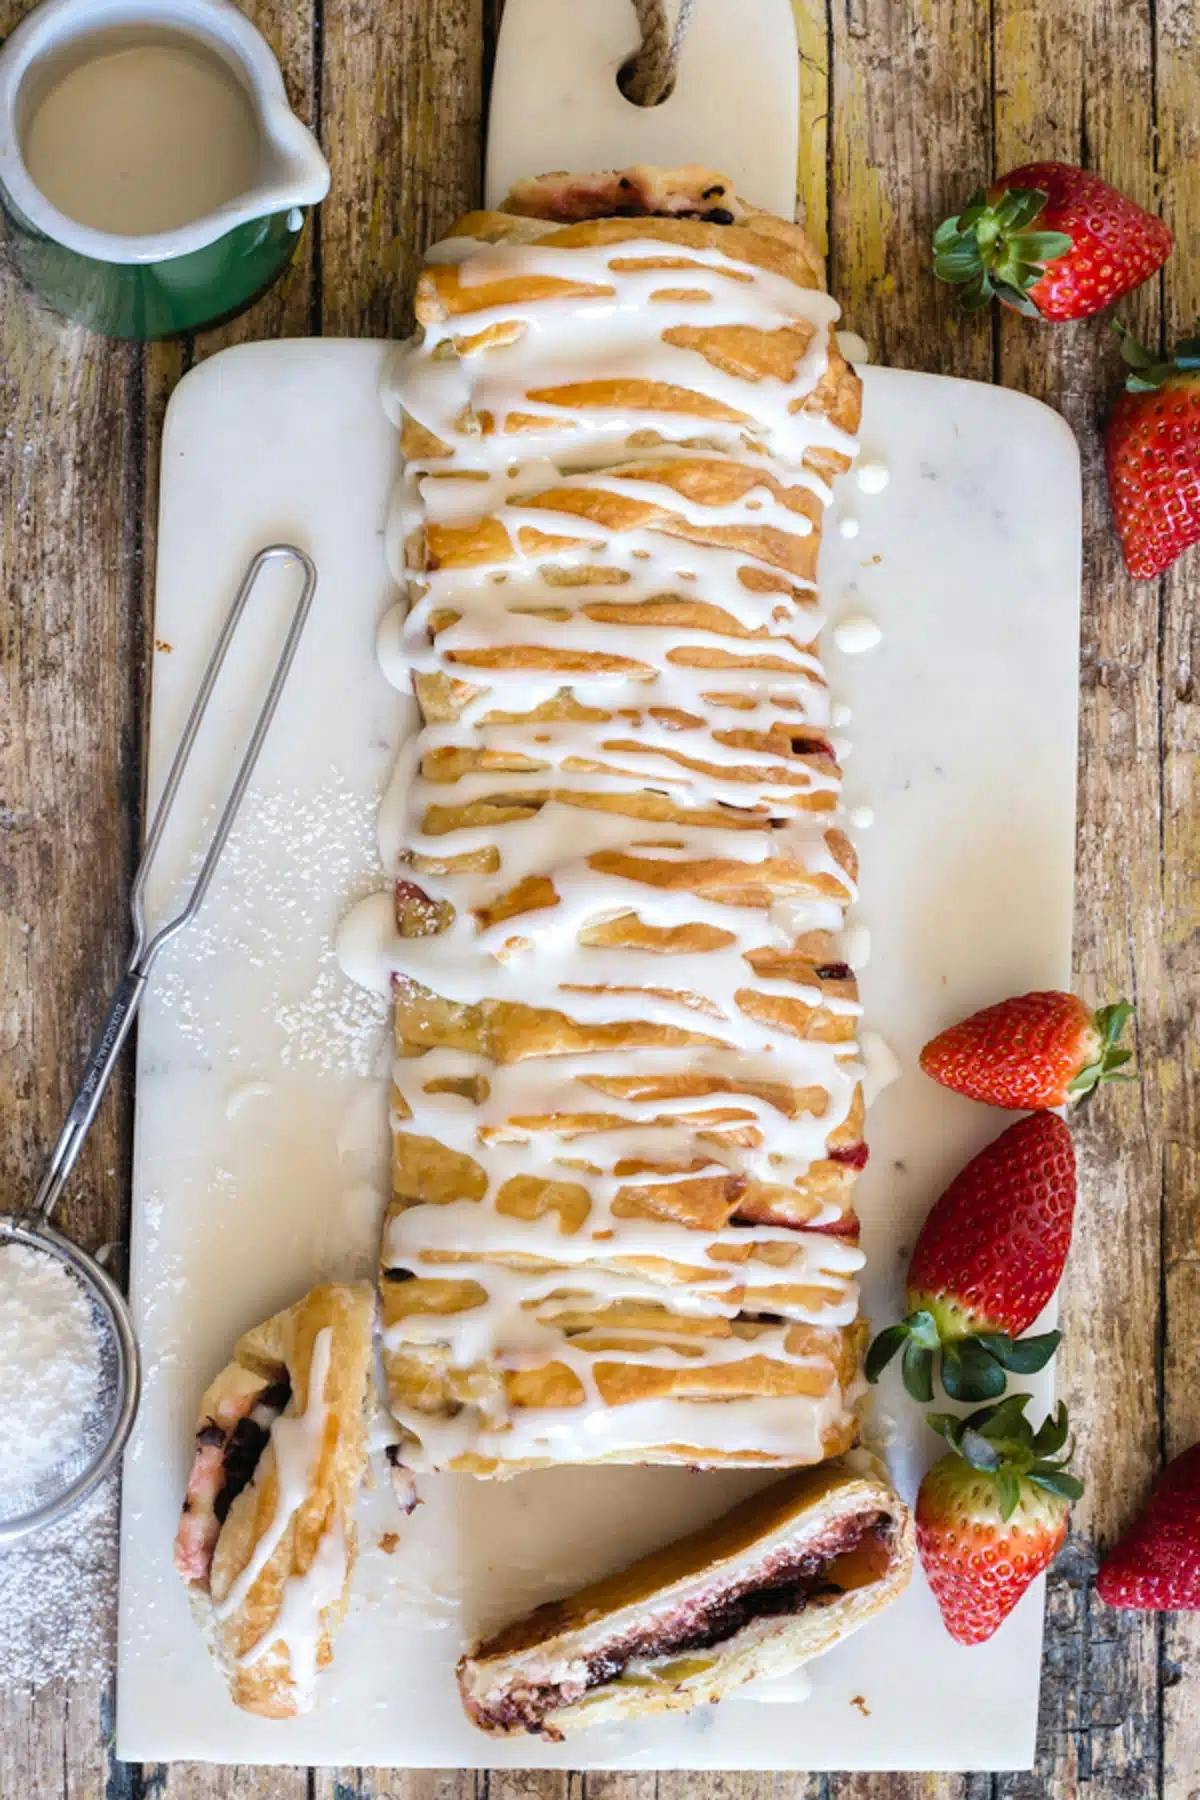 Strawberry strudel with two slices cut on a white board.